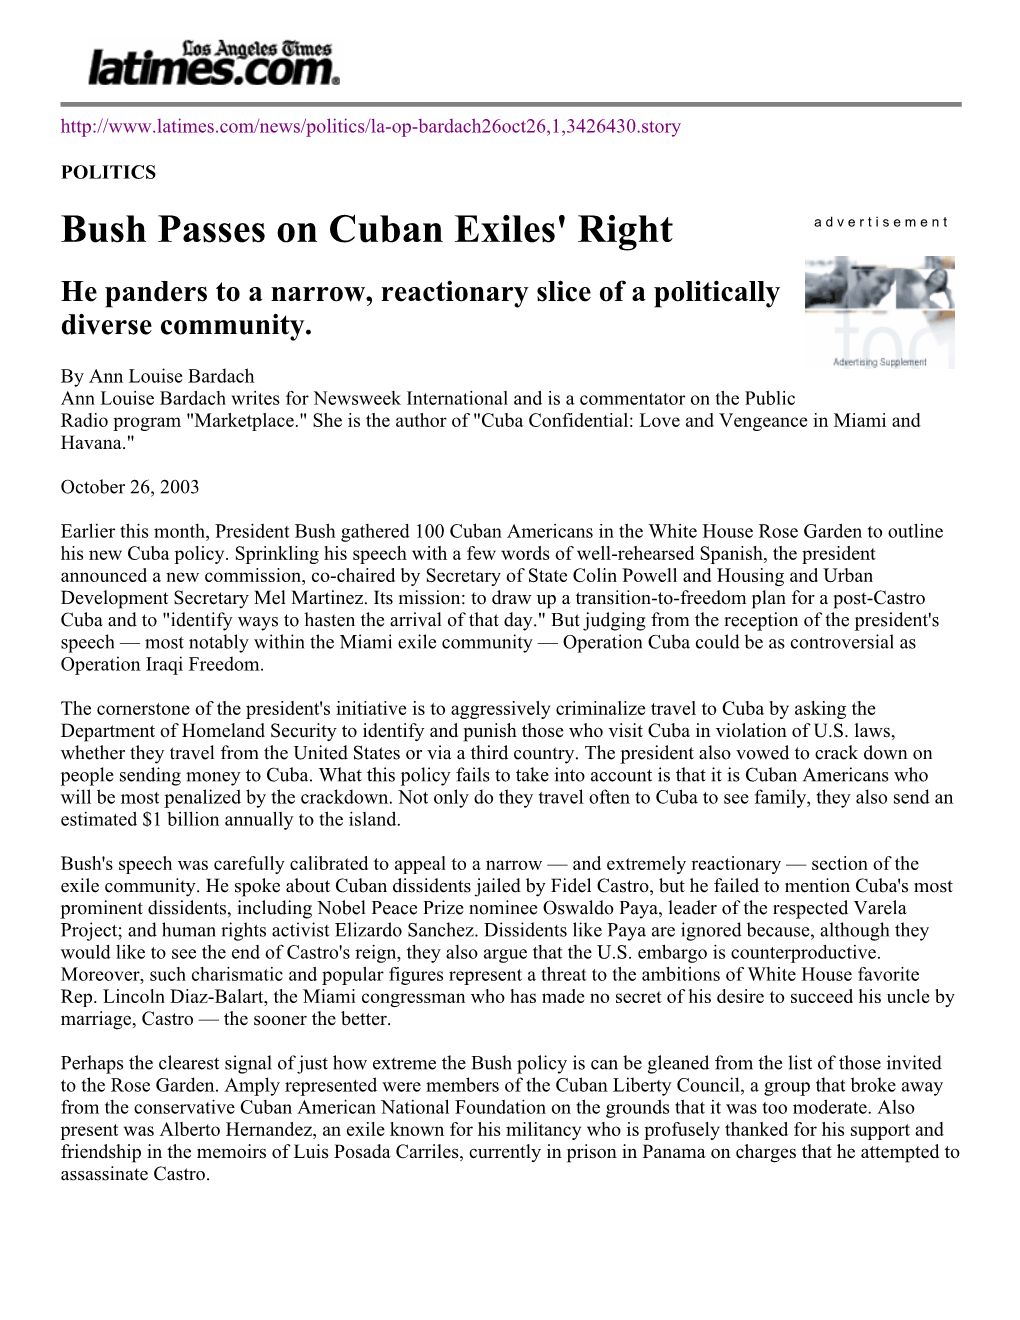 Bush Passes on Cuban Exiles' Right a D V E R T I S E M E N T He Panders to a Narrow, Reactionary Slice of a Politically Diverse Community